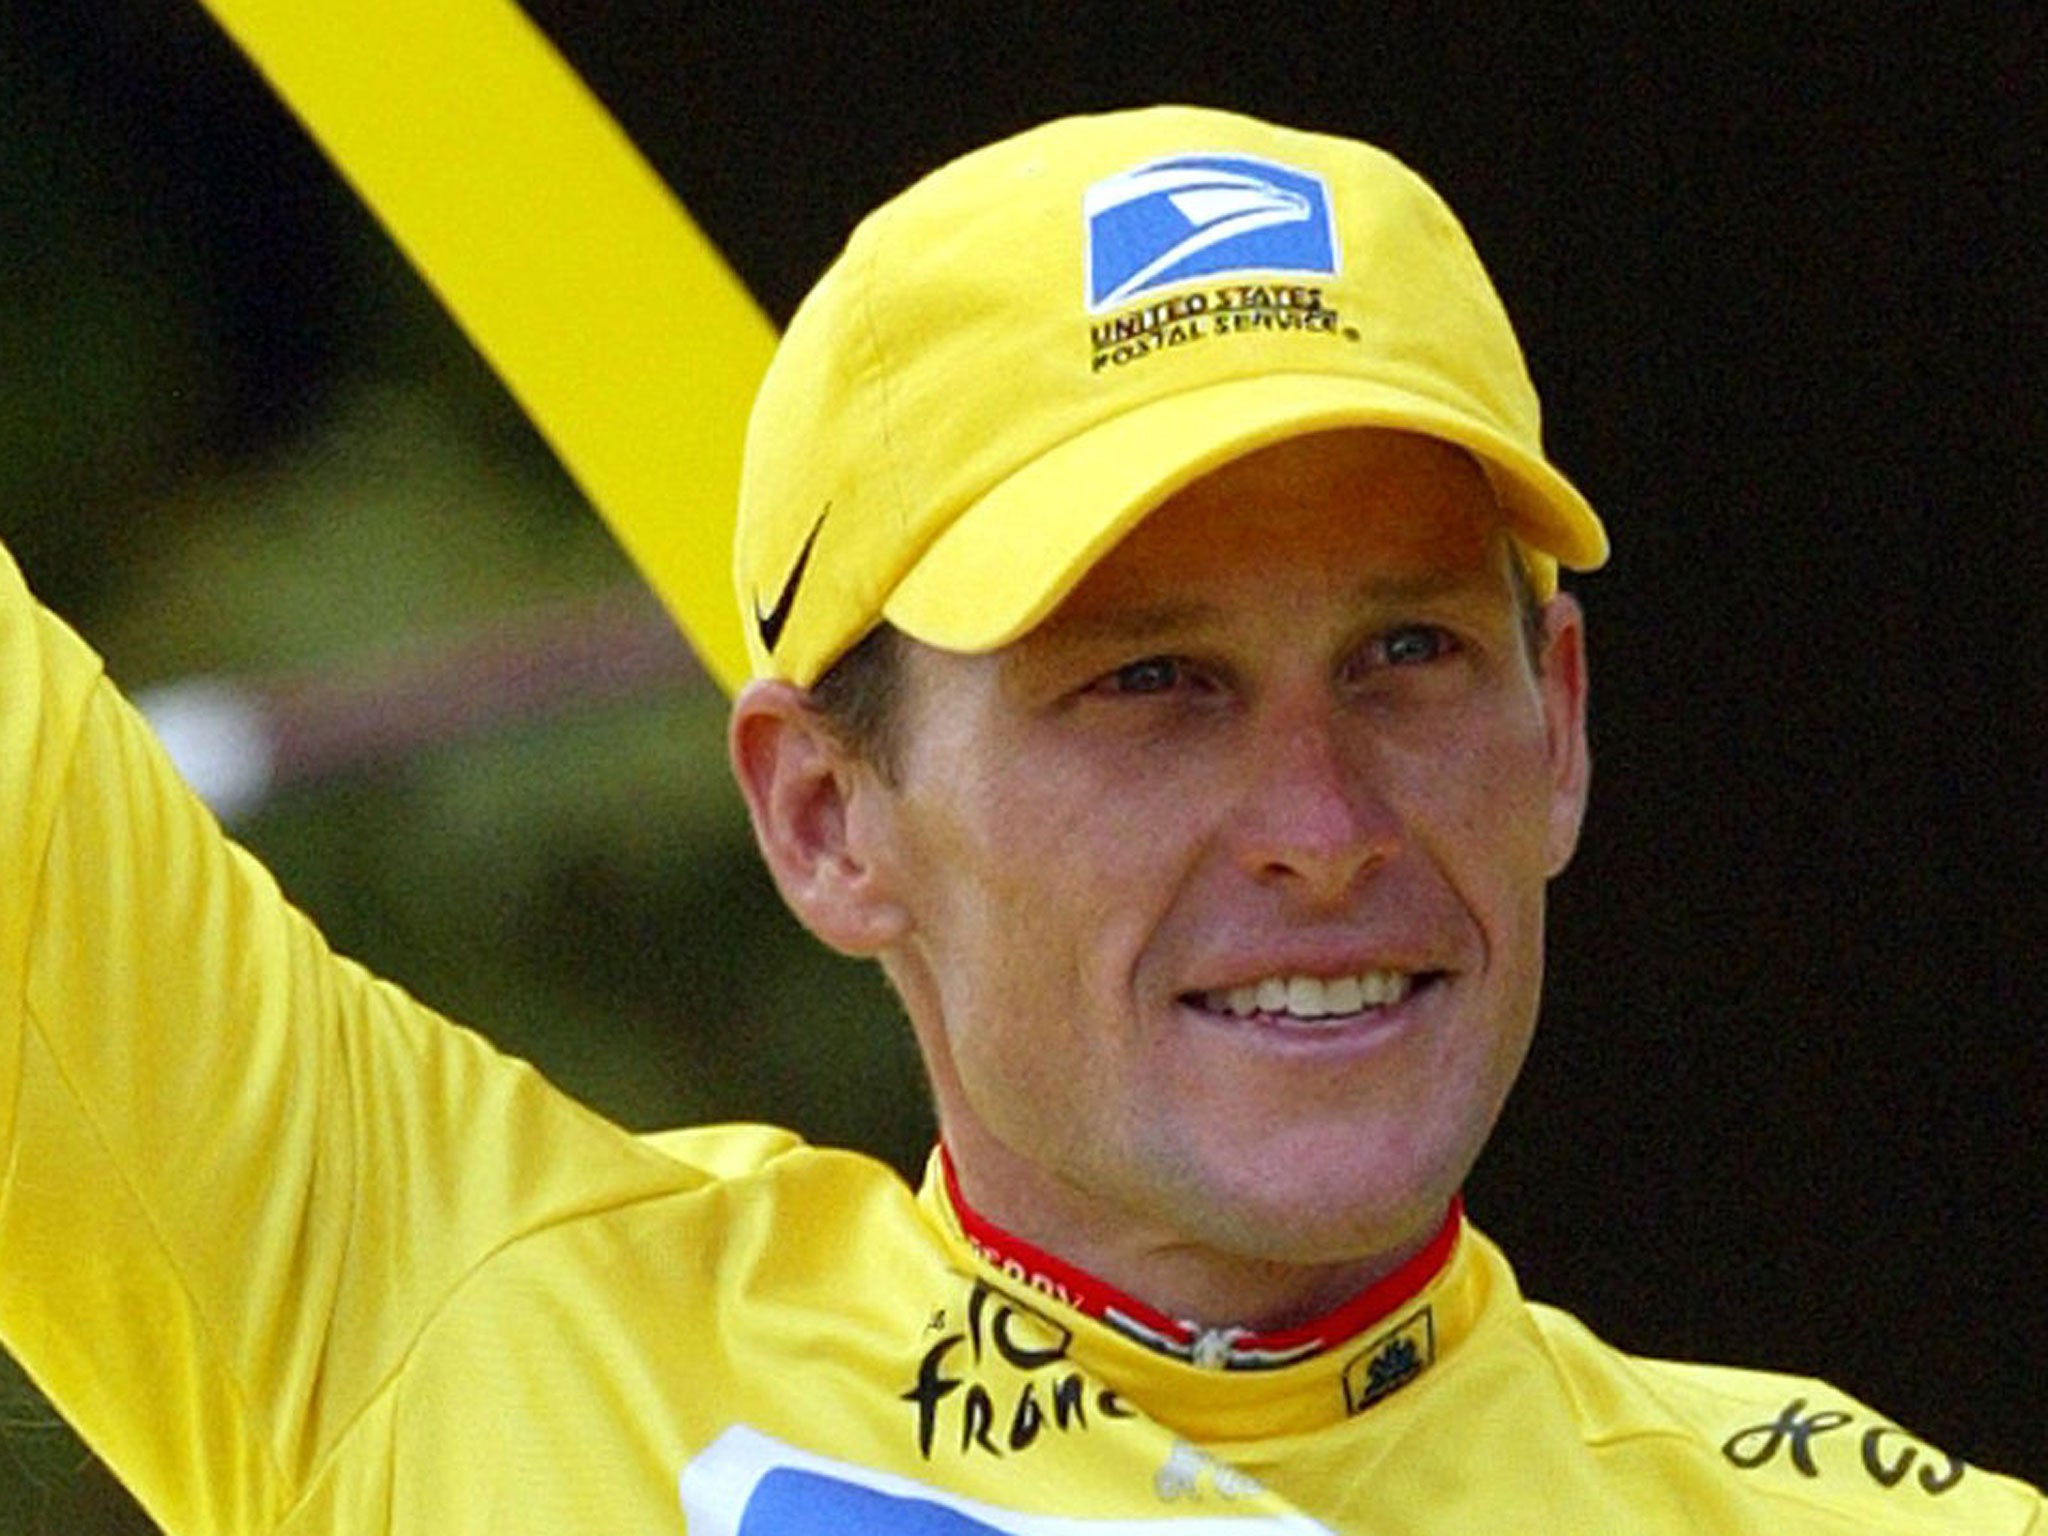 Fresh evidence has emerged about Armstrong's doping that raises further questions about the UCI's involvement in the scandal